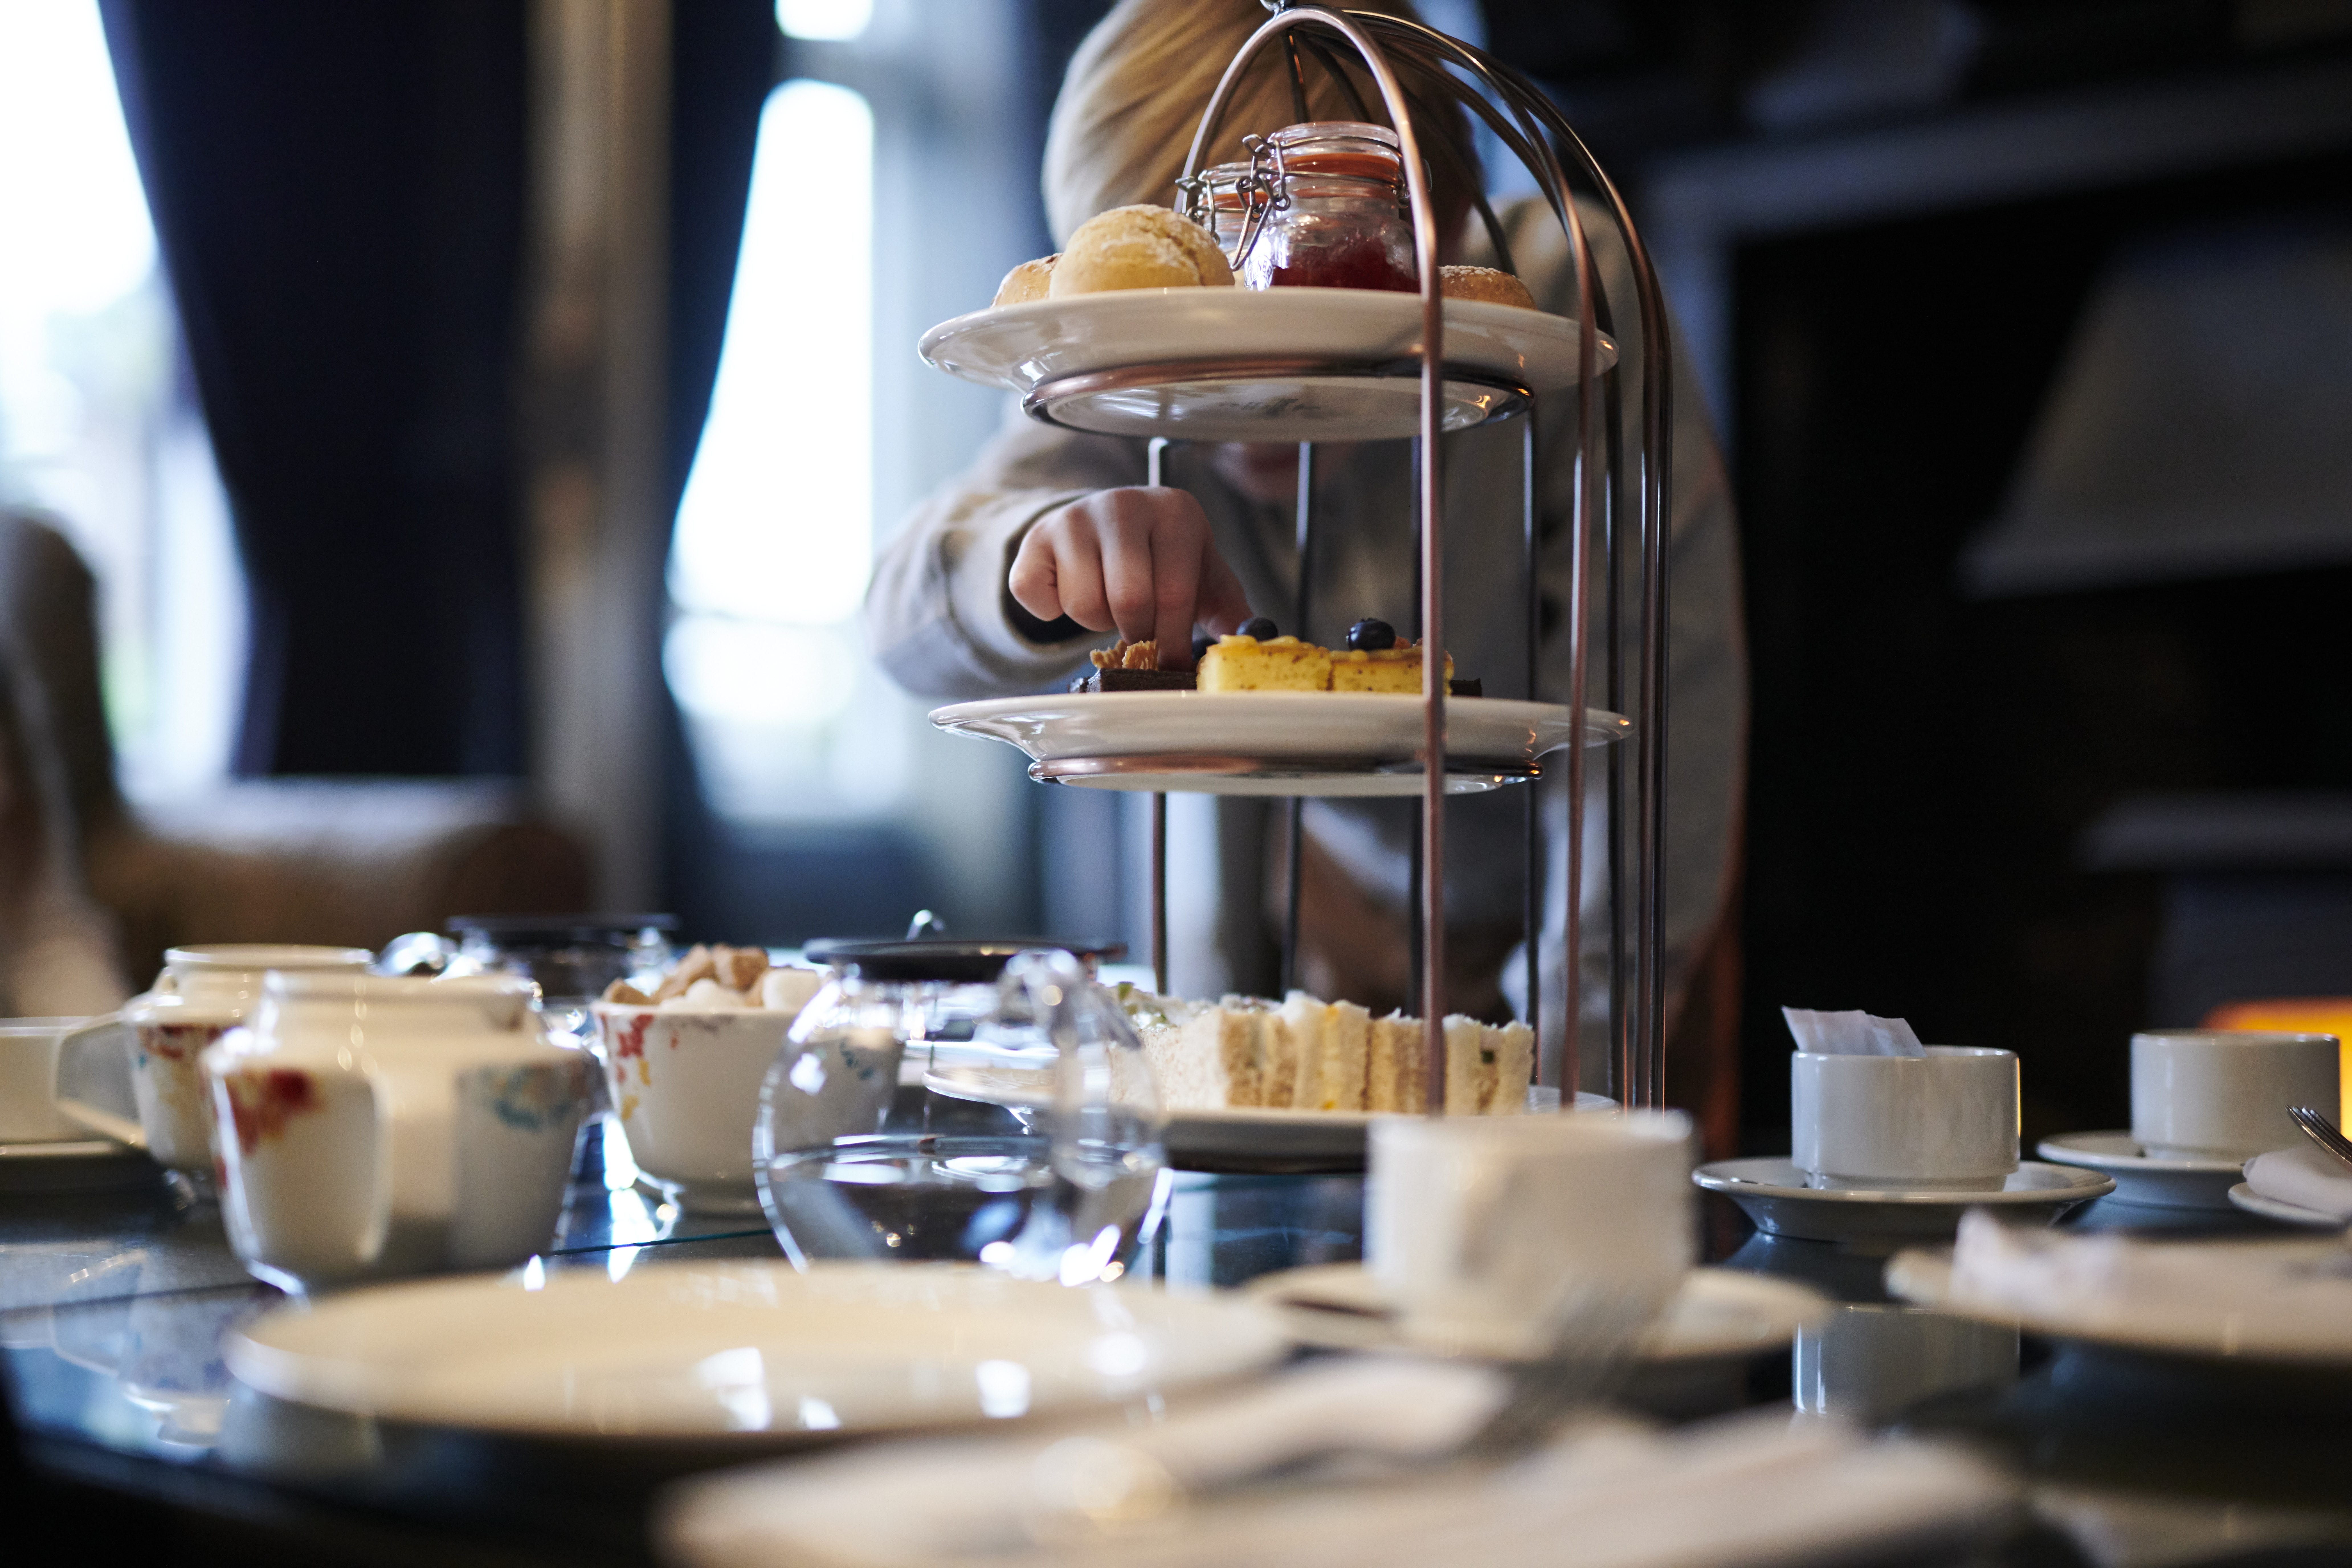 Food photo of hotel afternoon tea - Hospitality Photographic